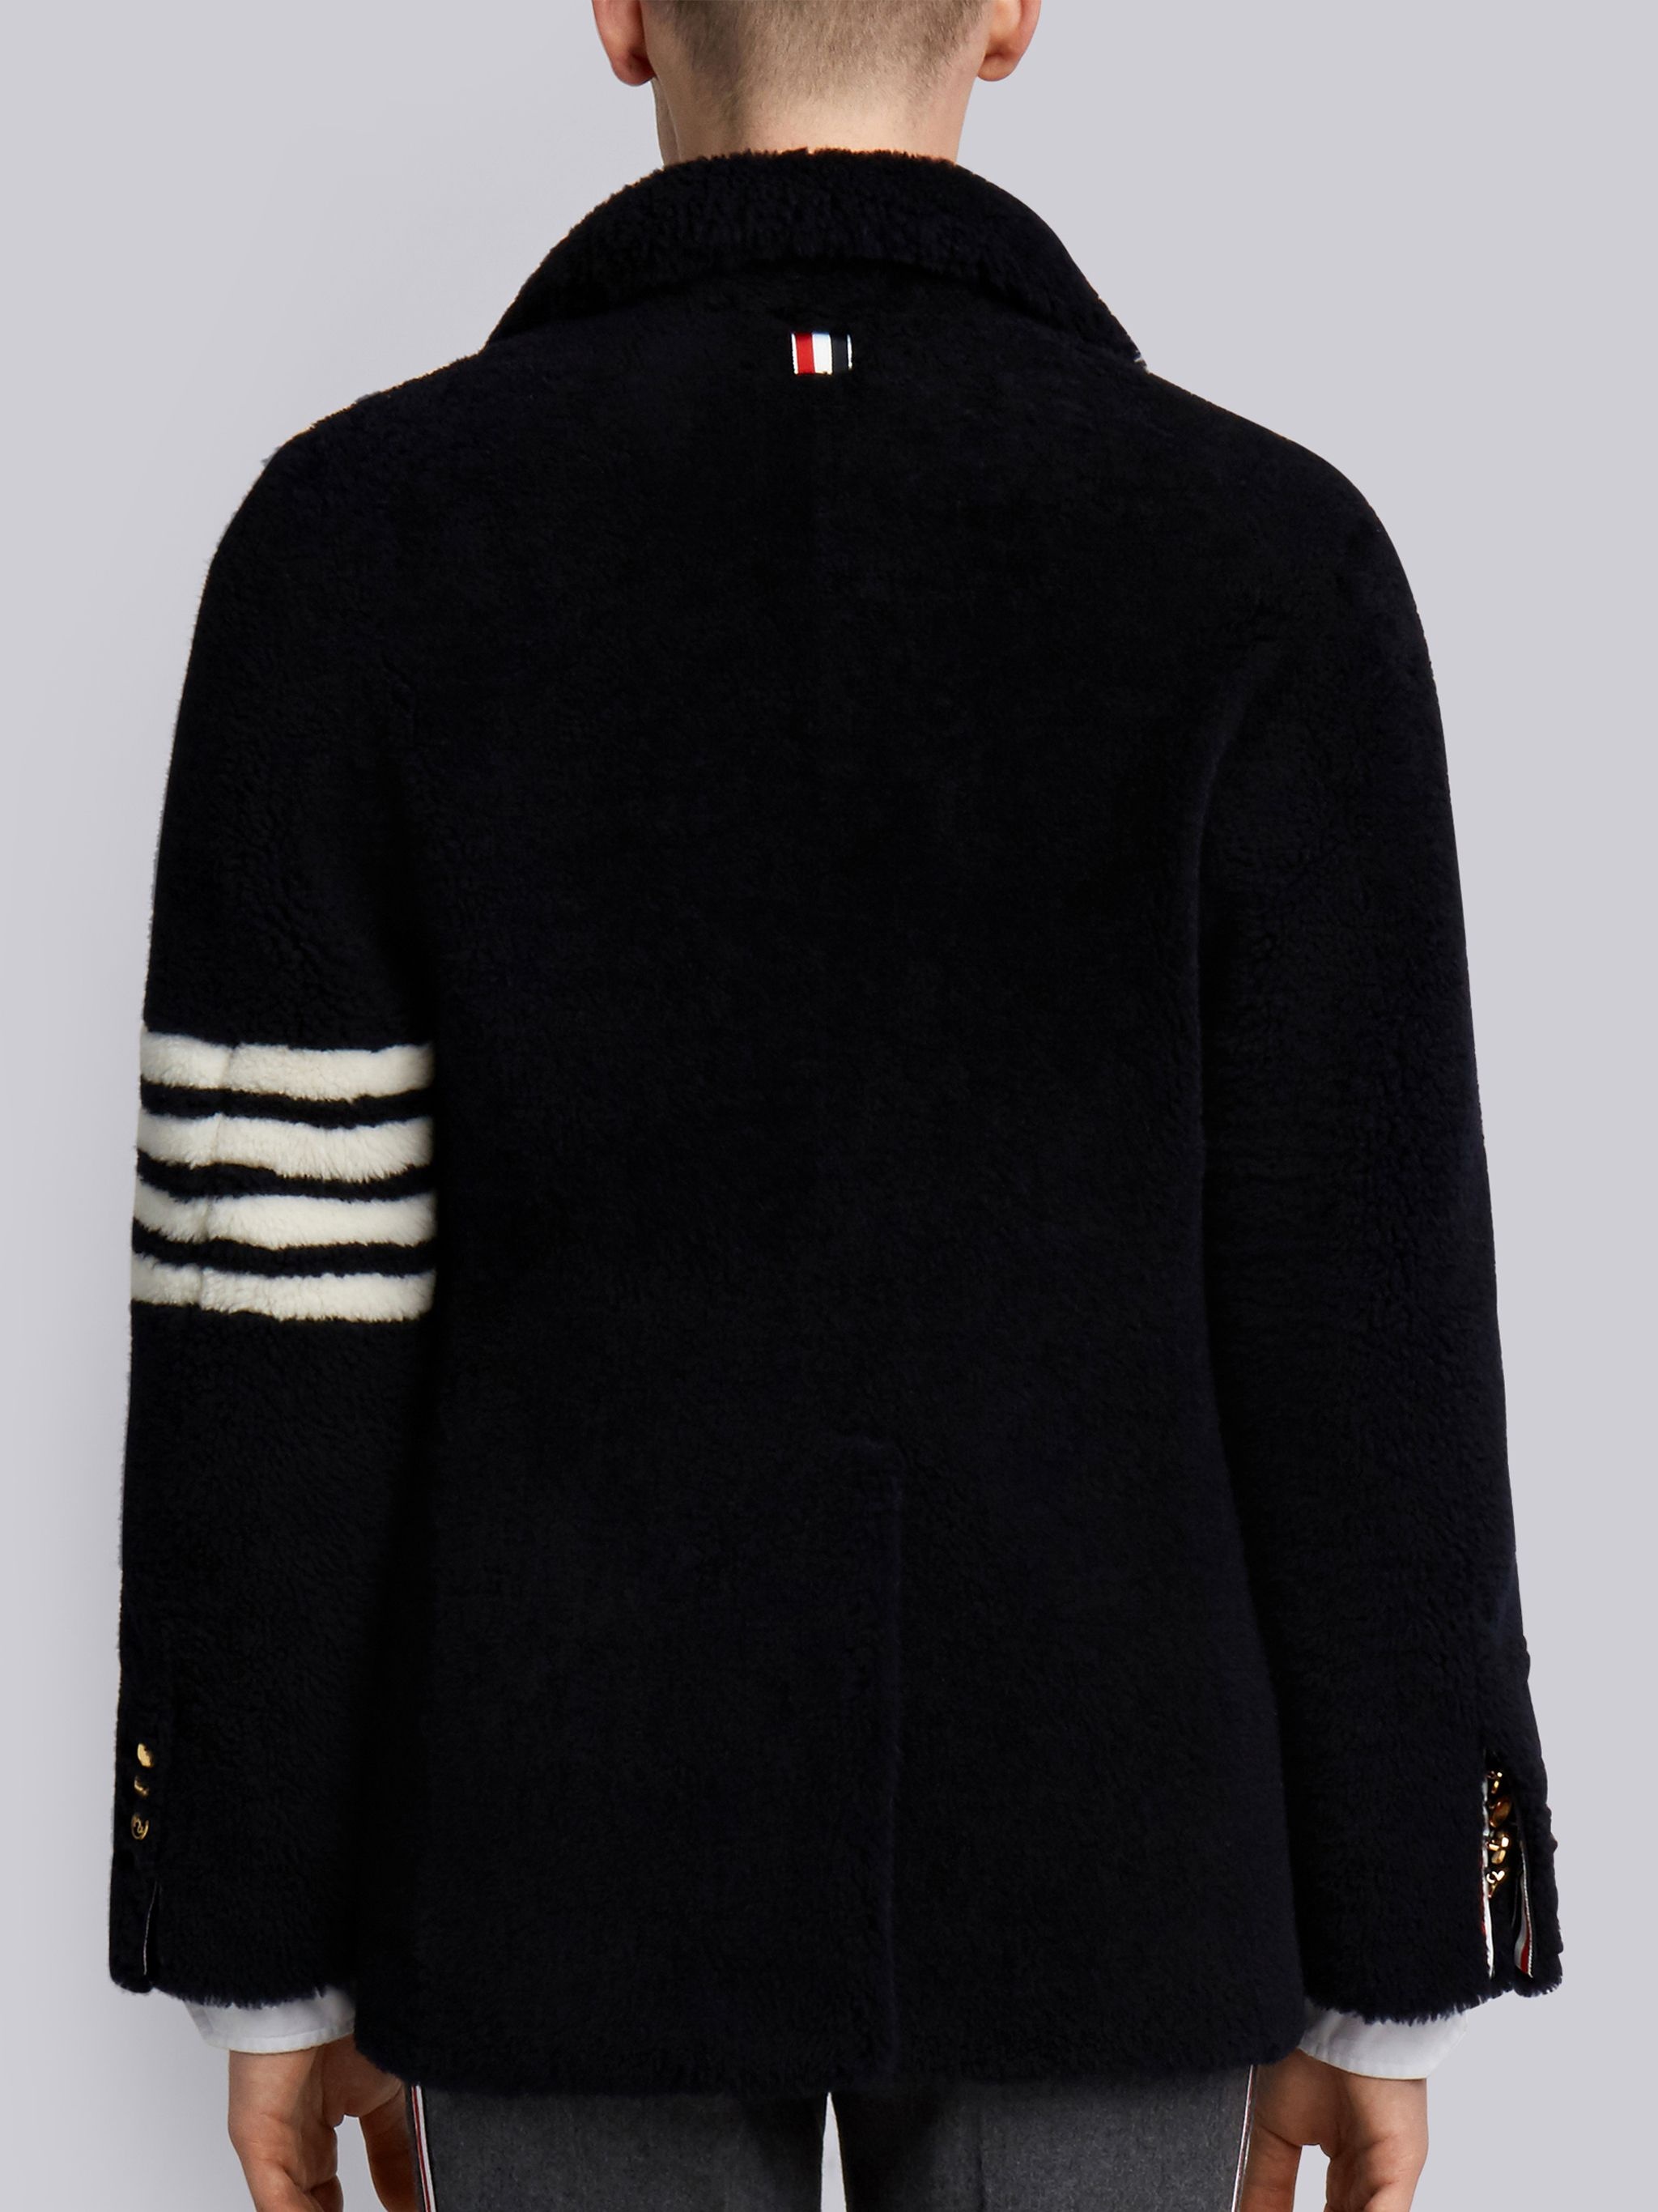 Navy Dyed Shearling 4-bar Unconstructed Peacoat - 3